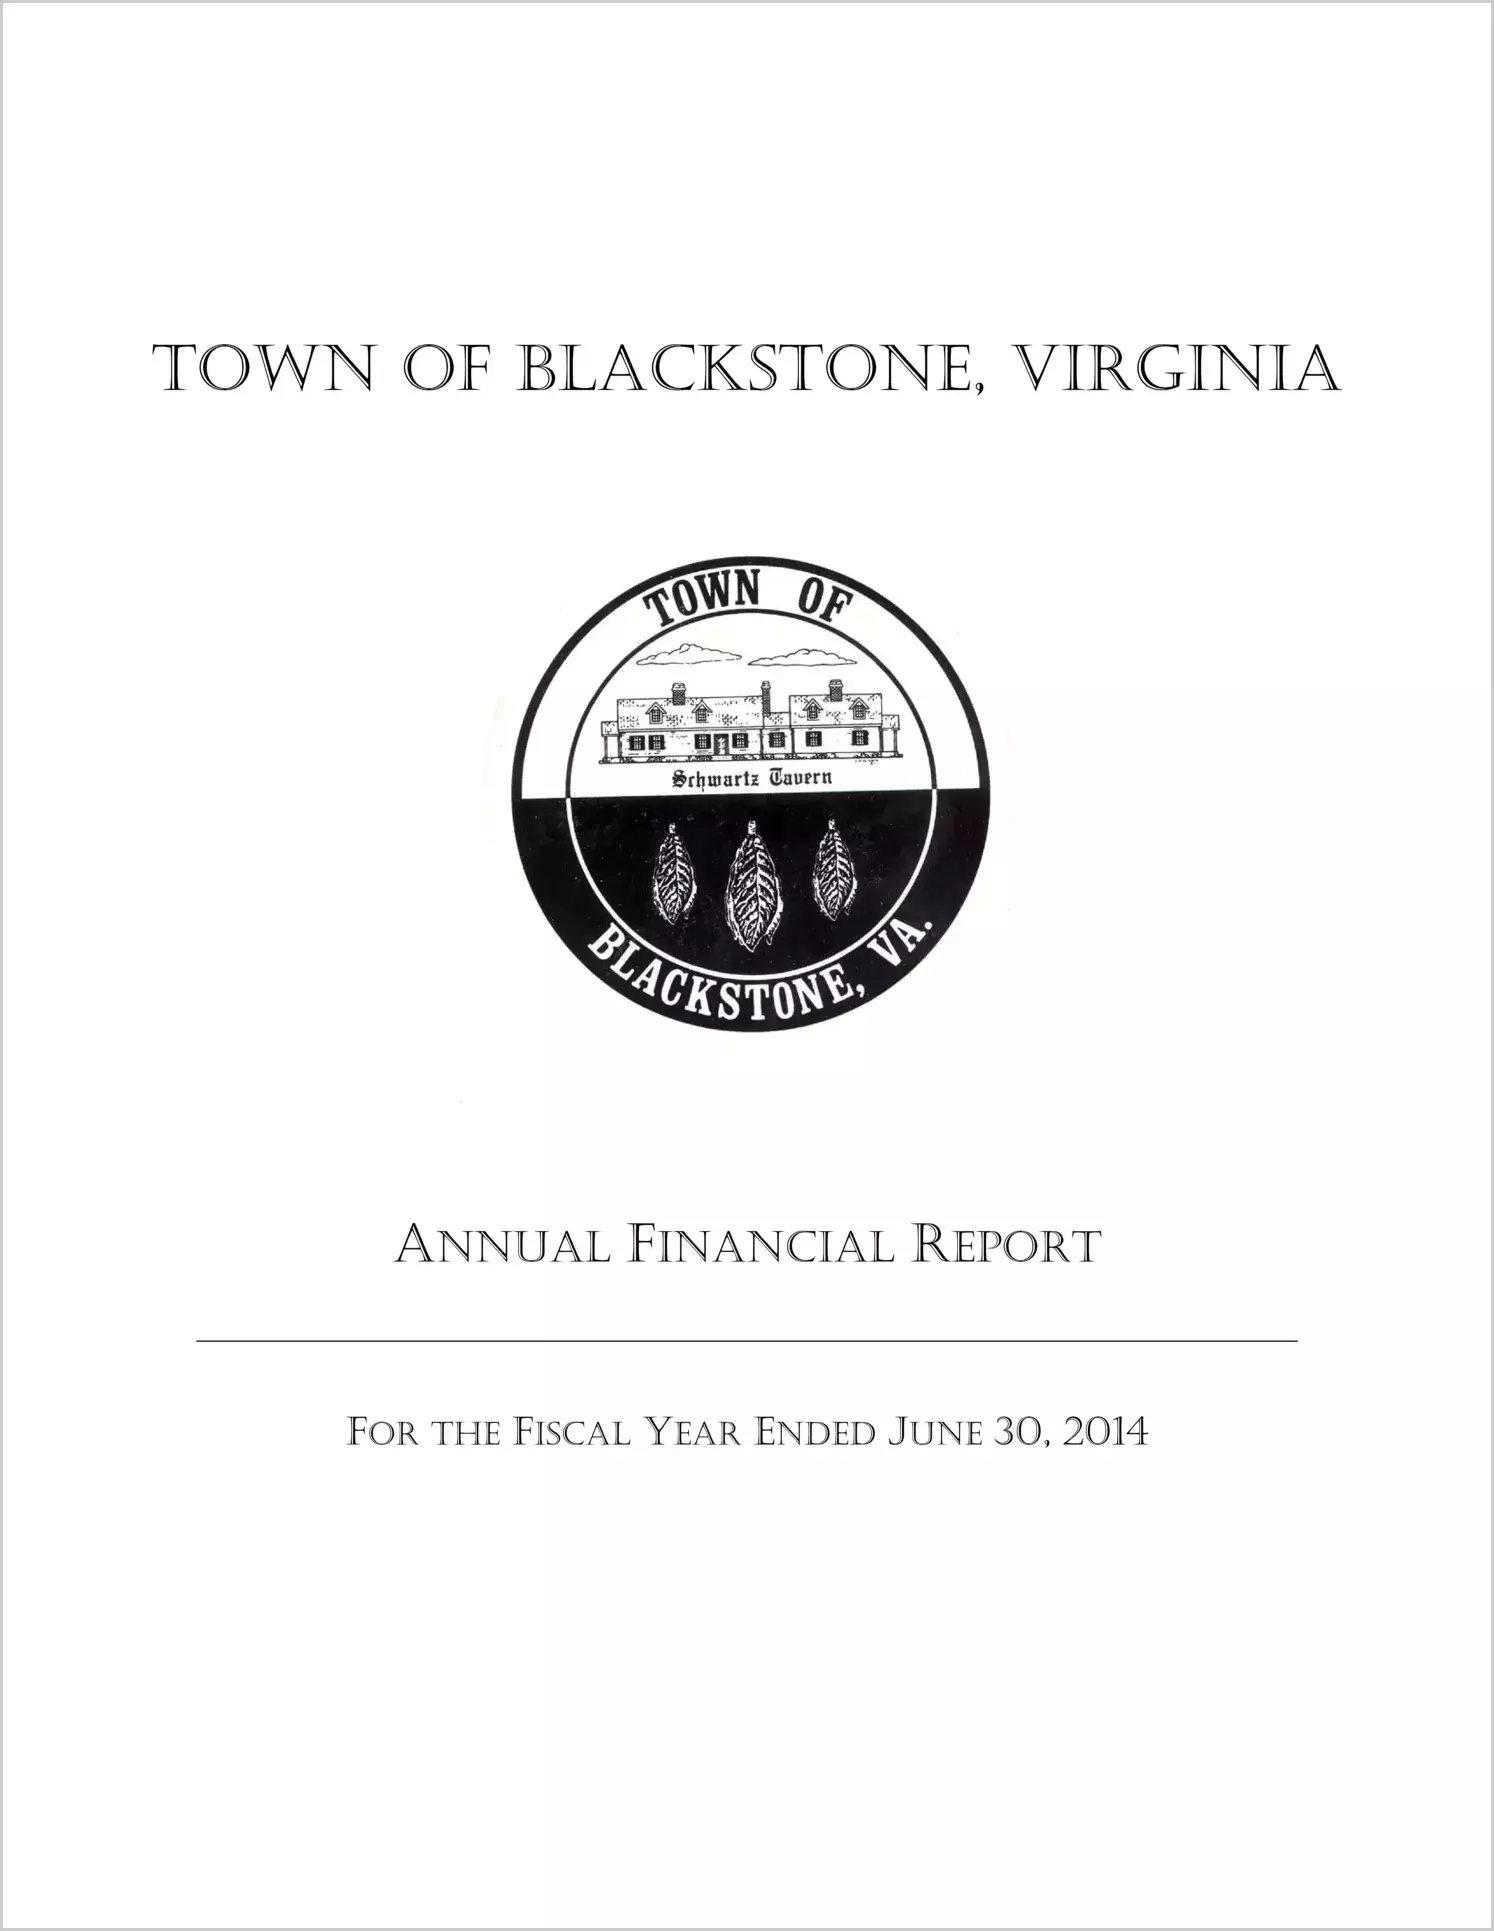 2014 Annual Financial Report for Town of Blackstone